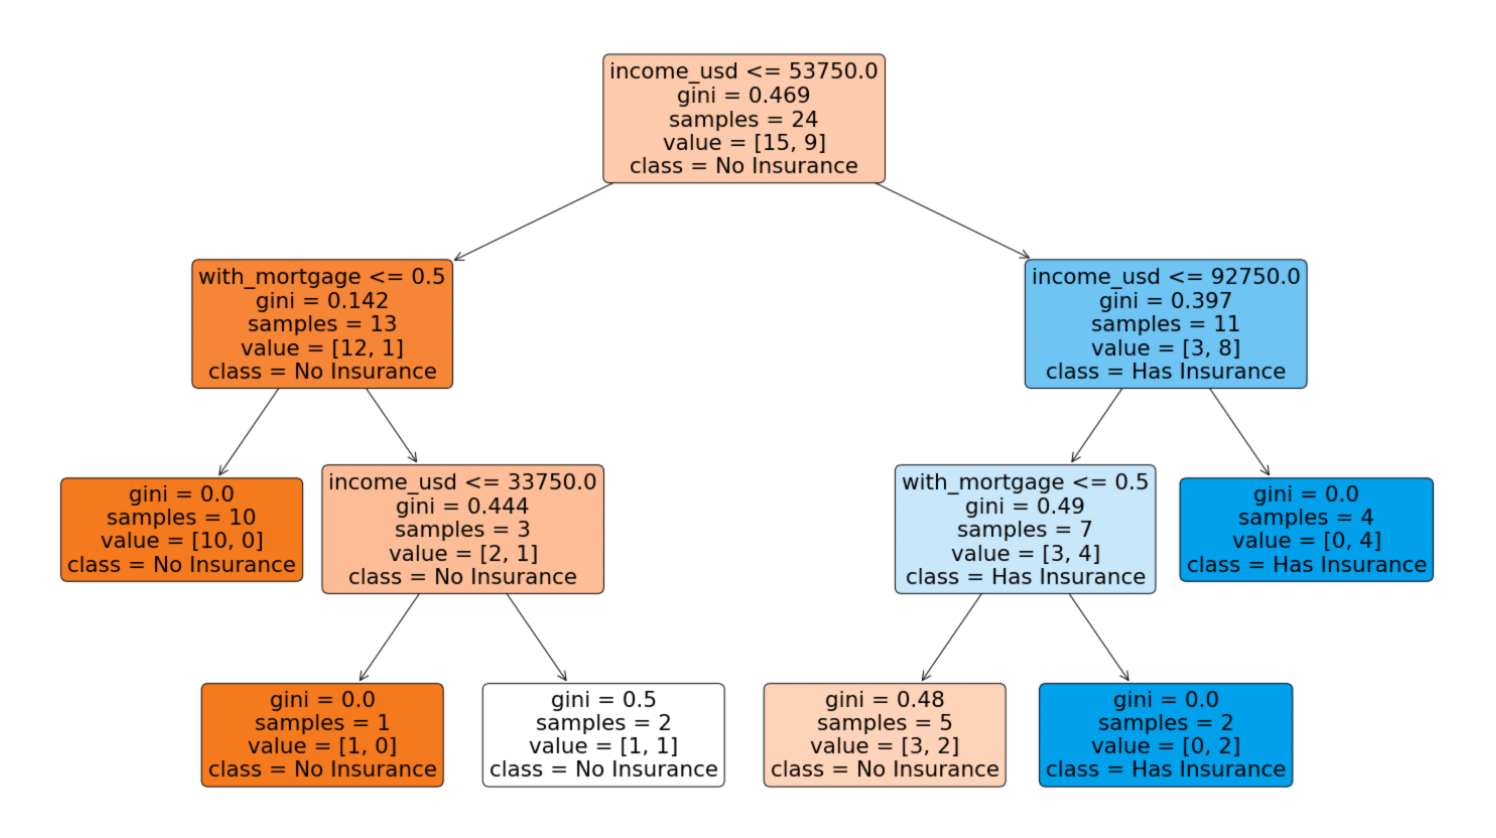 How to build a decision tree model with scikit-learn